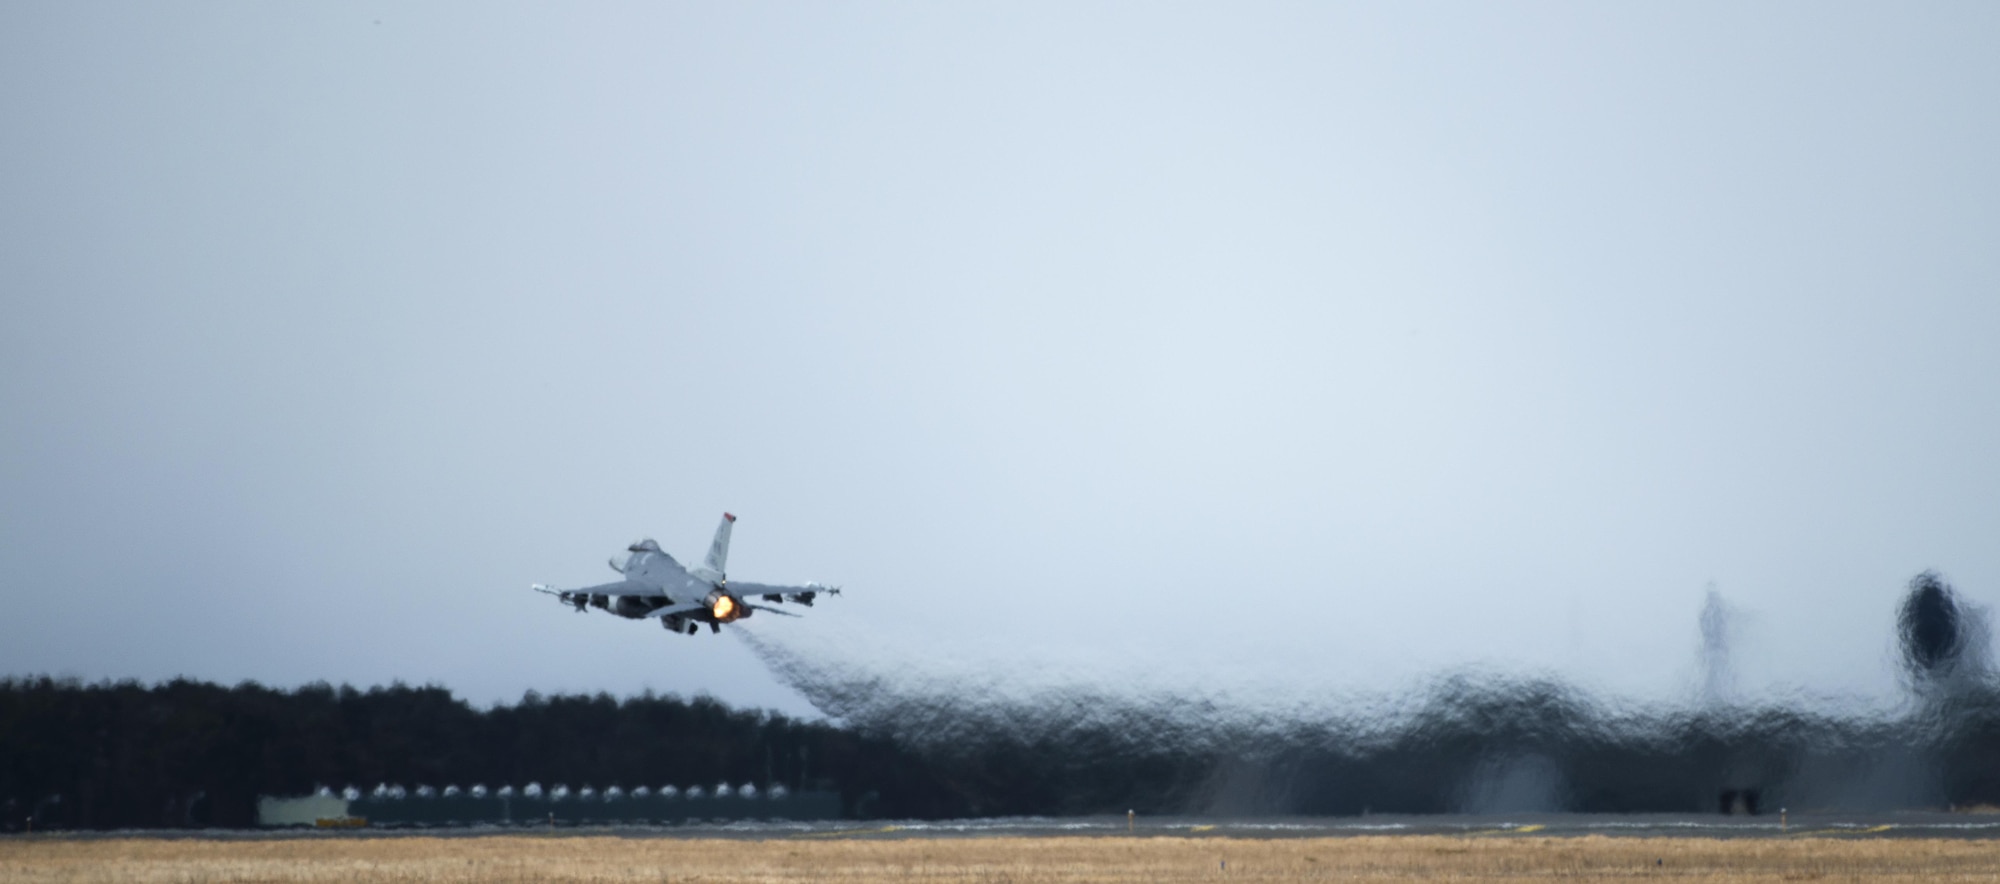 An F-16 Fighting Falcon takes off during a dissimilar air combat-training at Misawa Air Base, Japan, March 17, 2017. The DAC-T is a practice of using various aircraft, while integrating with other national forces, to execute one common goal. (U.S. Air Force photo by Senior Airman Jarrod Vickers)